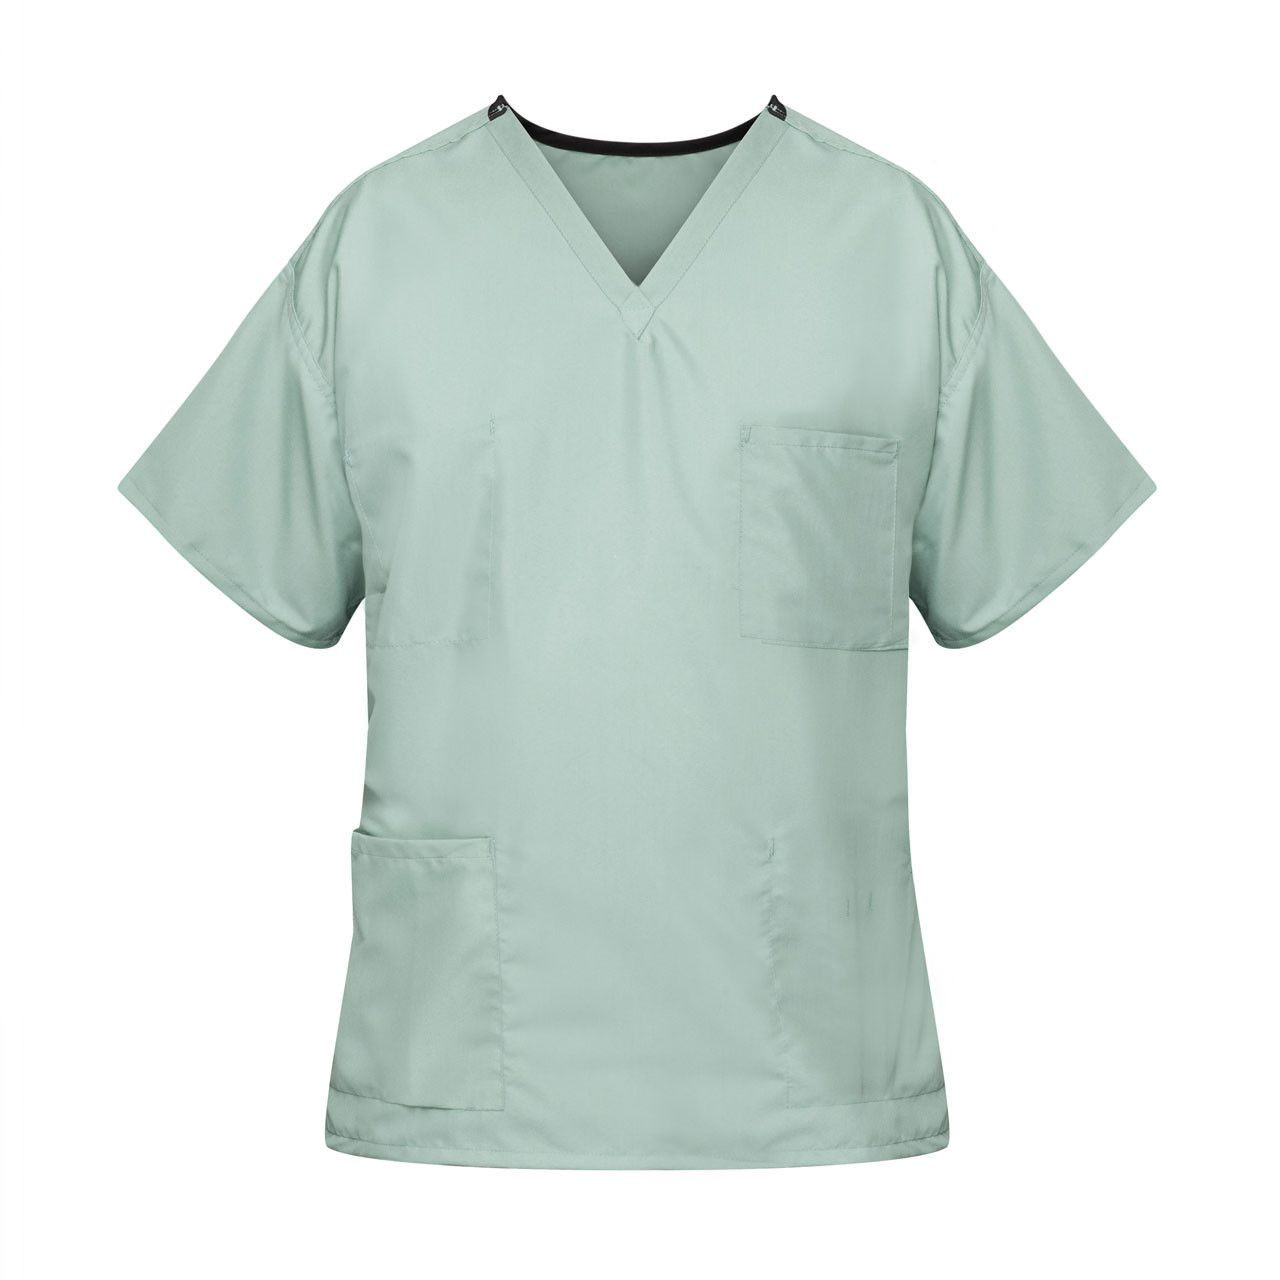 What features does the Misty Green Scrub Top, a case of 24 unisex reversible scrubs, offer?